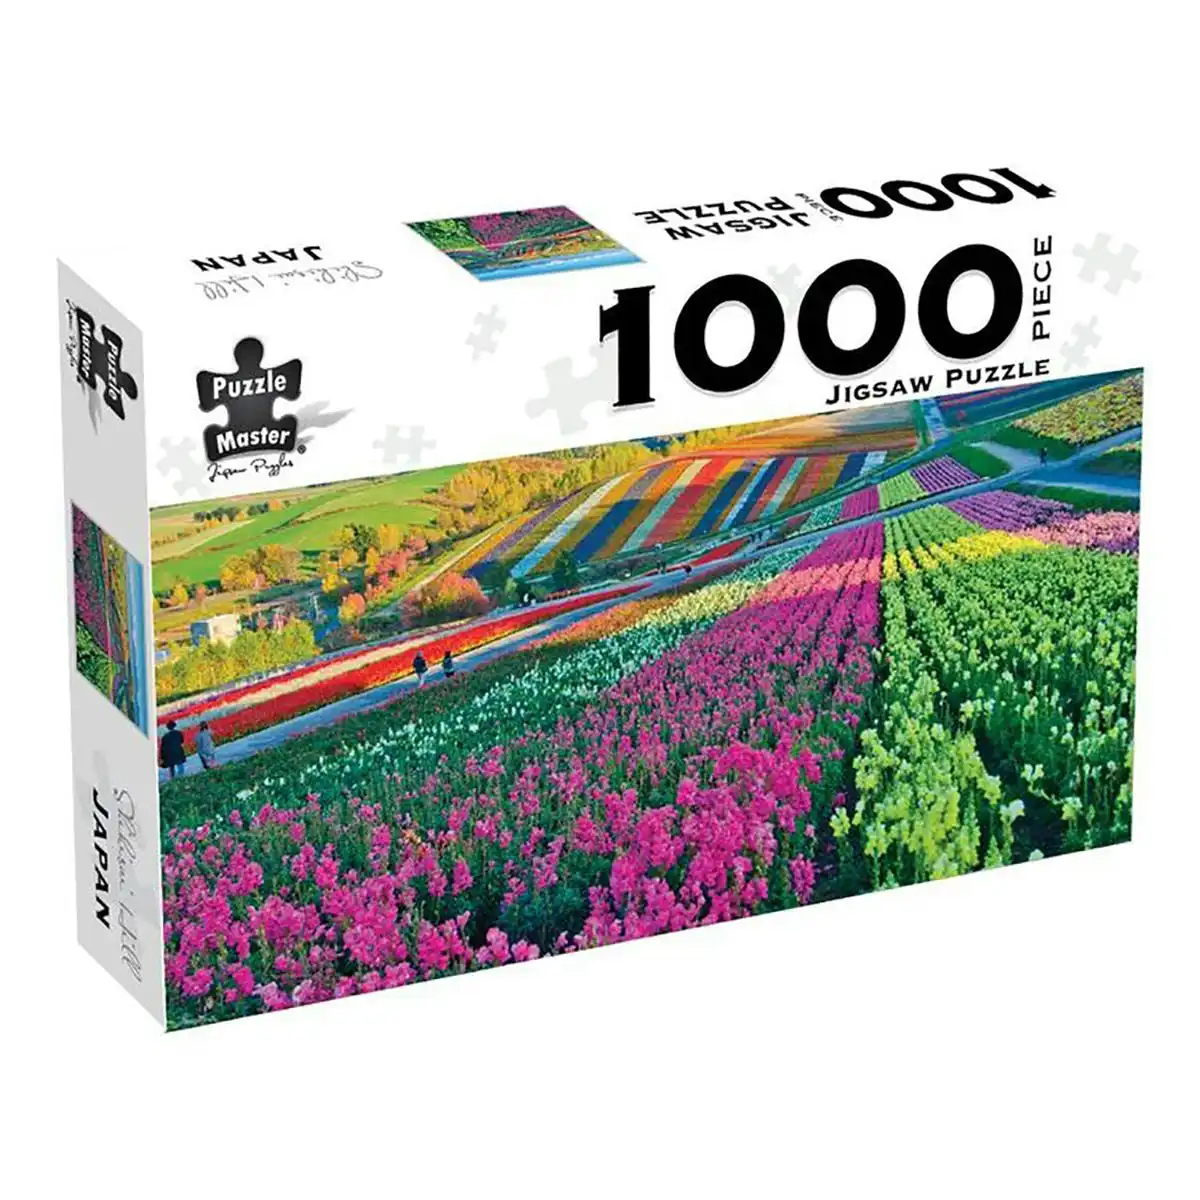 Puzzle Master 1000-Piece Jigsaw Puzzle, Shikisai Hill Japan